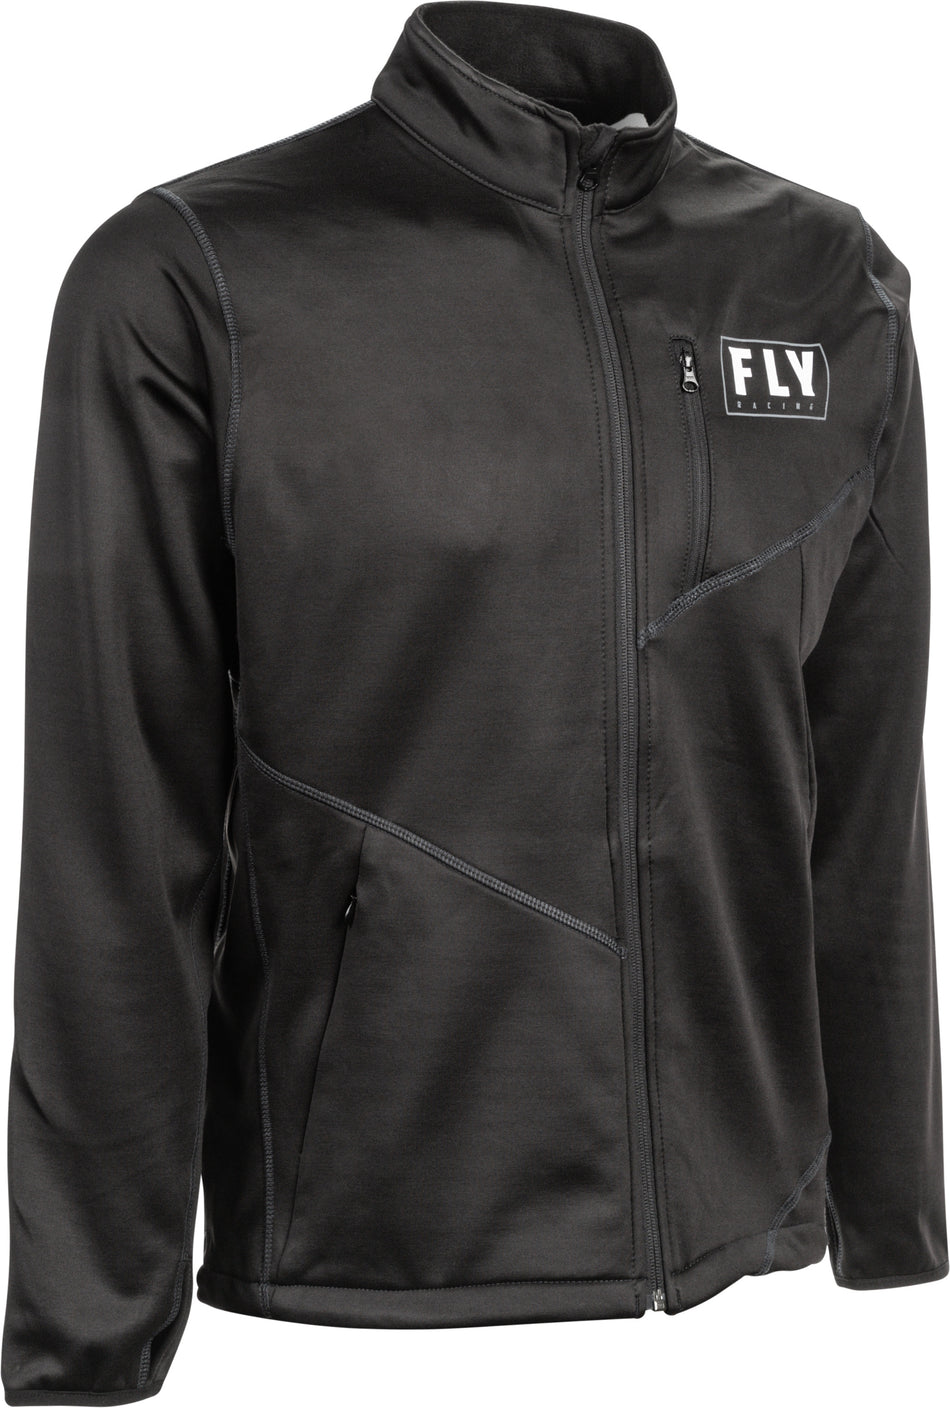 FLY RACING Mid-Layer Jacket Black Sm 354-6320S